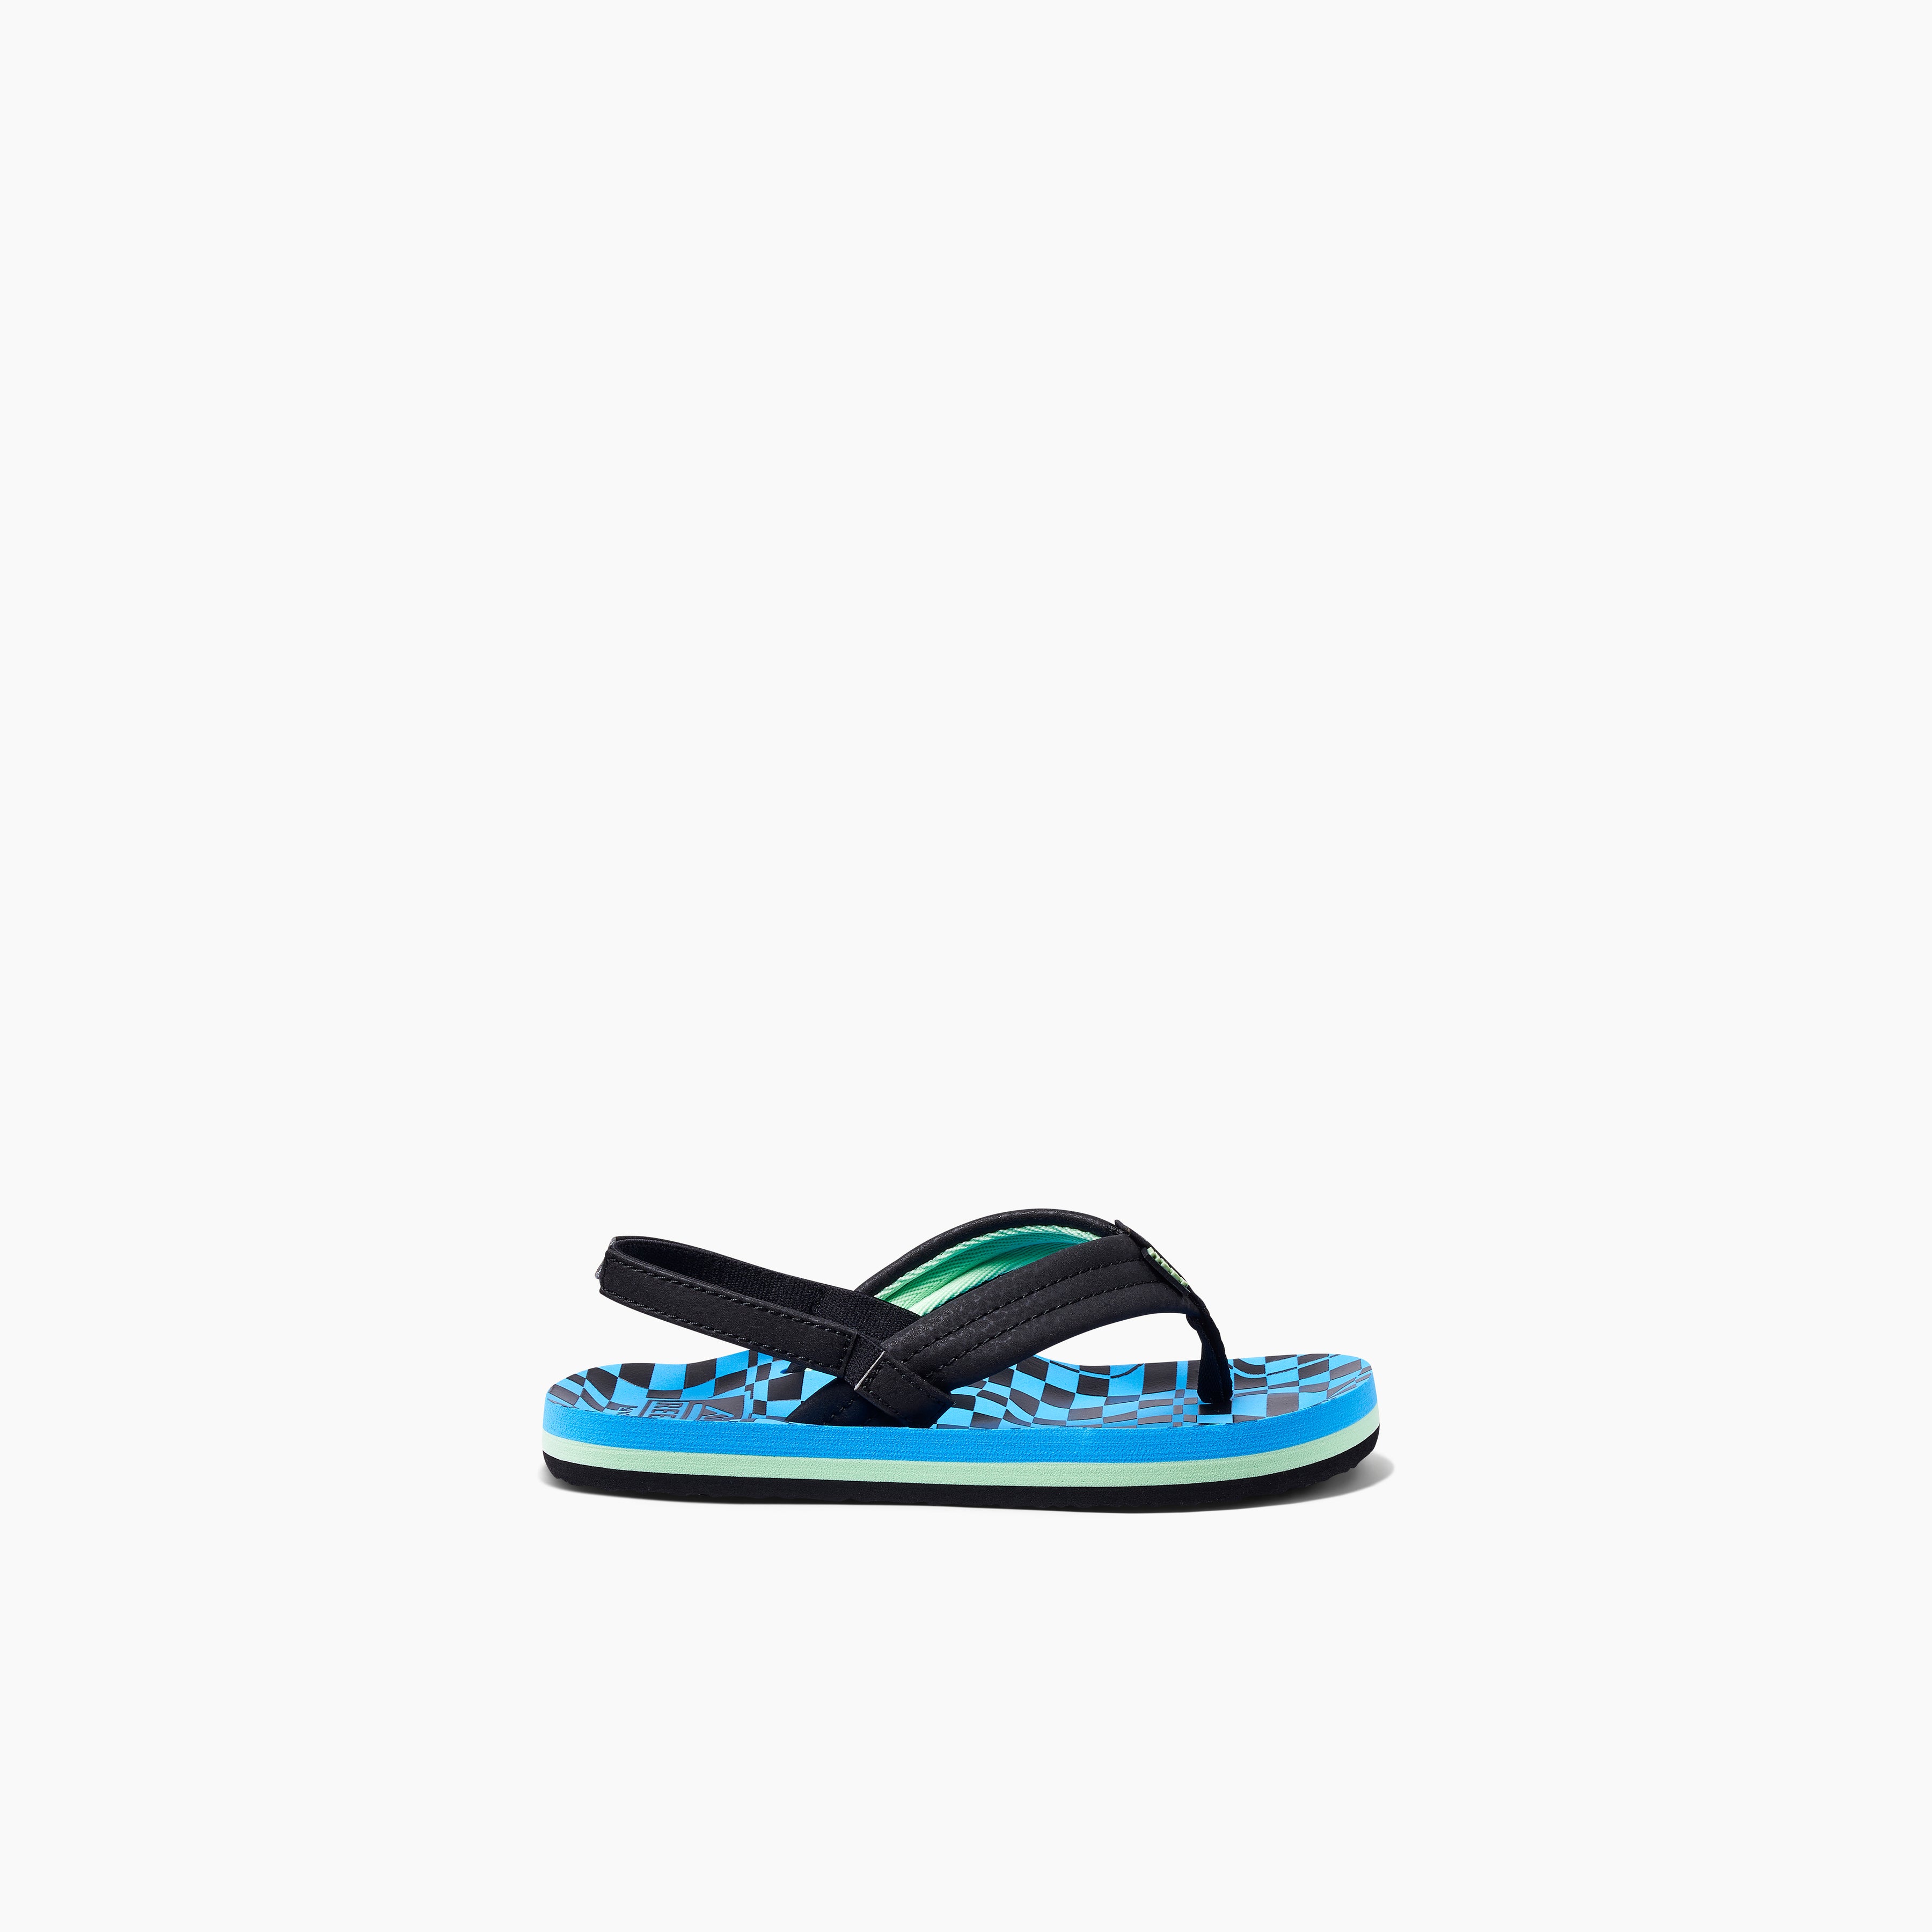 Toddler Boy's Ahi Sandals in Swell Checkers side view